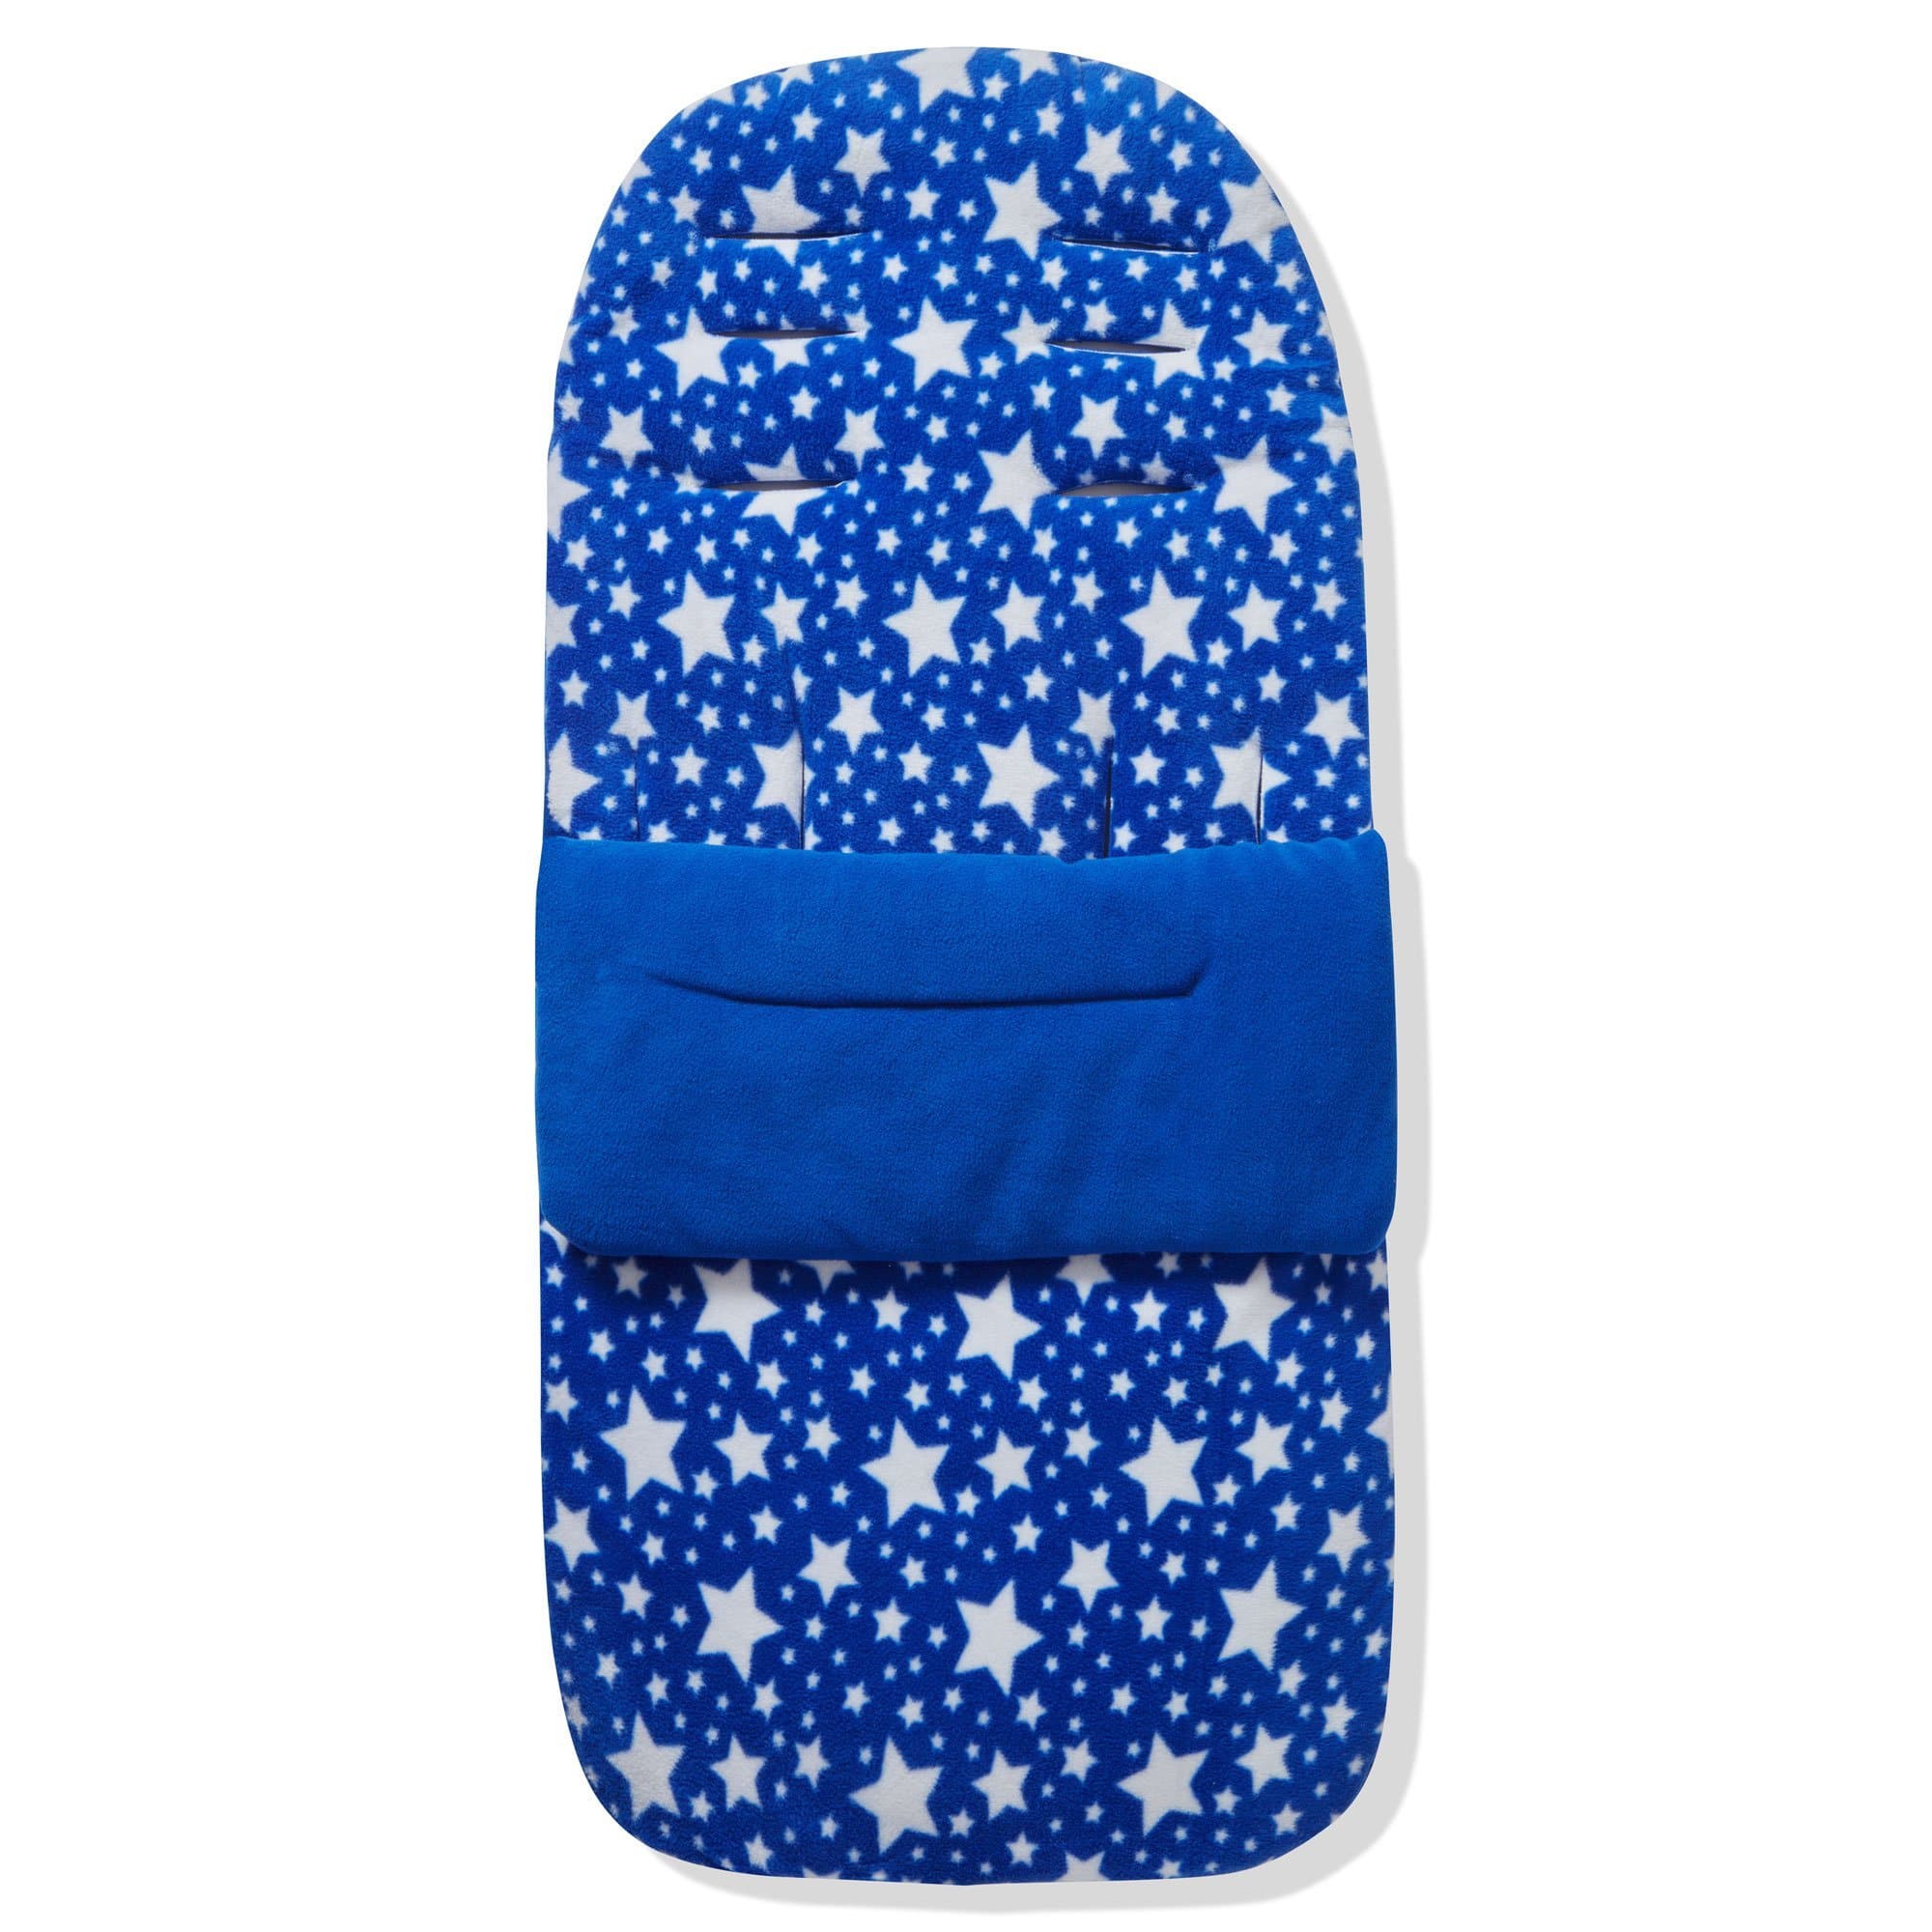 Fleece Footmuff / Cosy Toes Compatible with Babybus - Blue Star / Fits All Models | For Your Little One